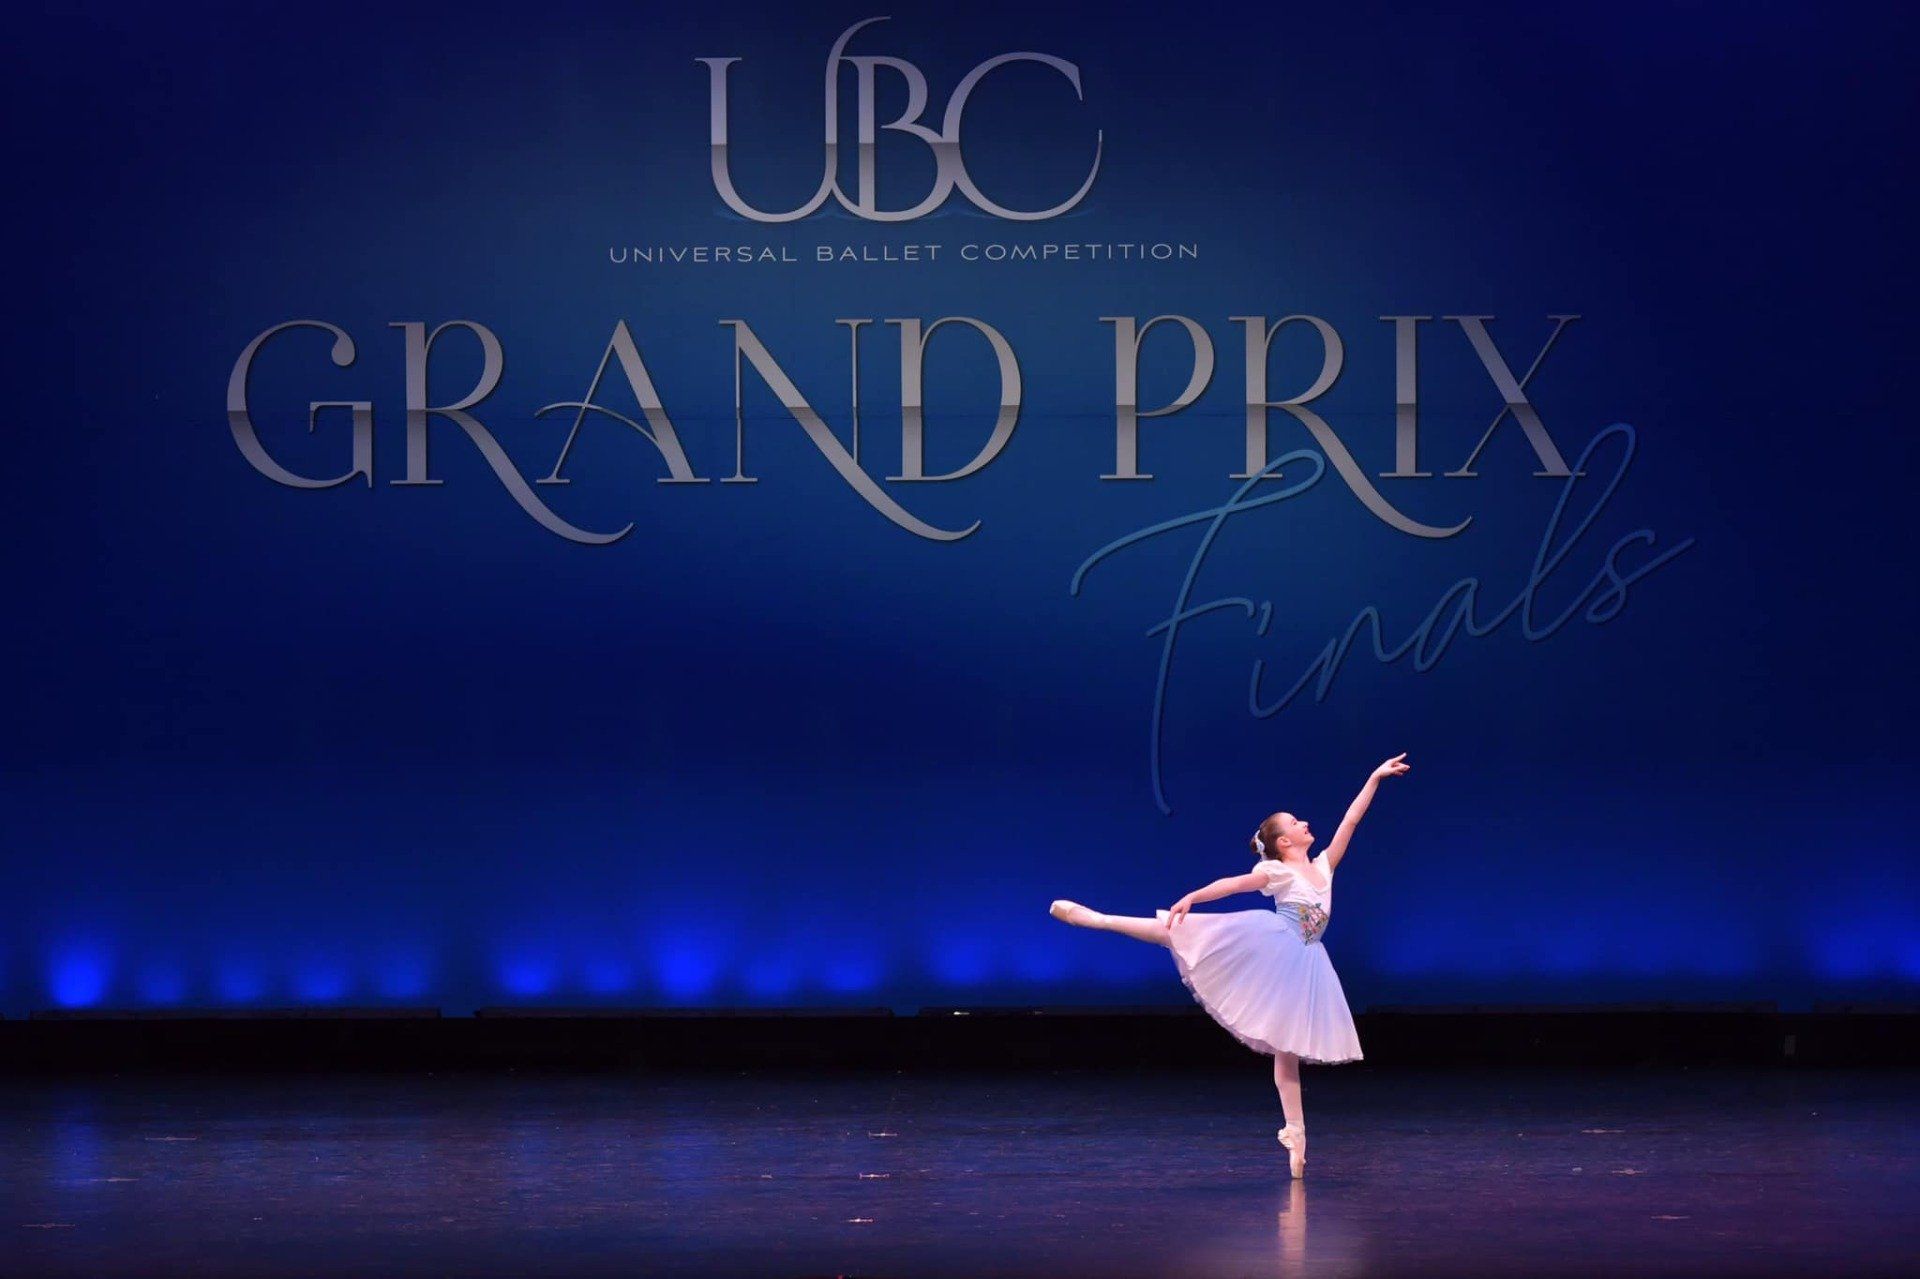 One of our dancers who attended and won at the Universal Ballet Competition